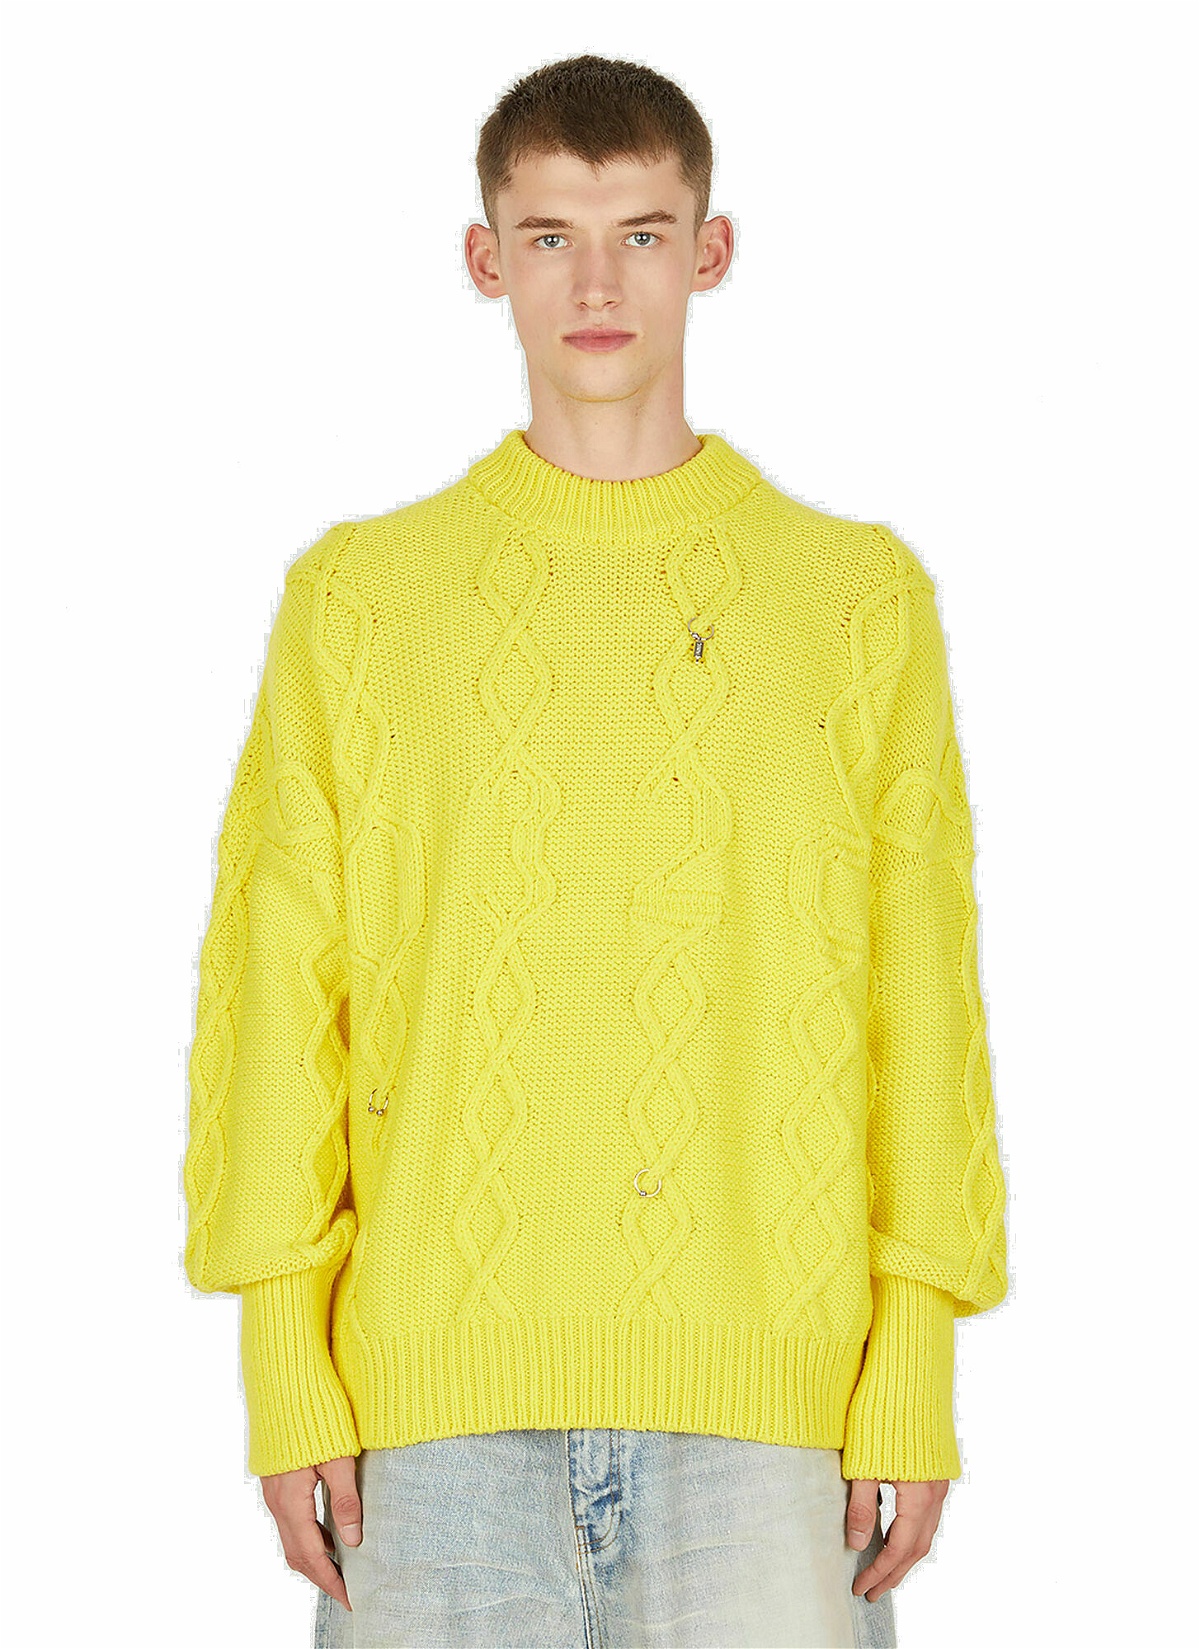 Photo: The Highland Sweater in Yellow